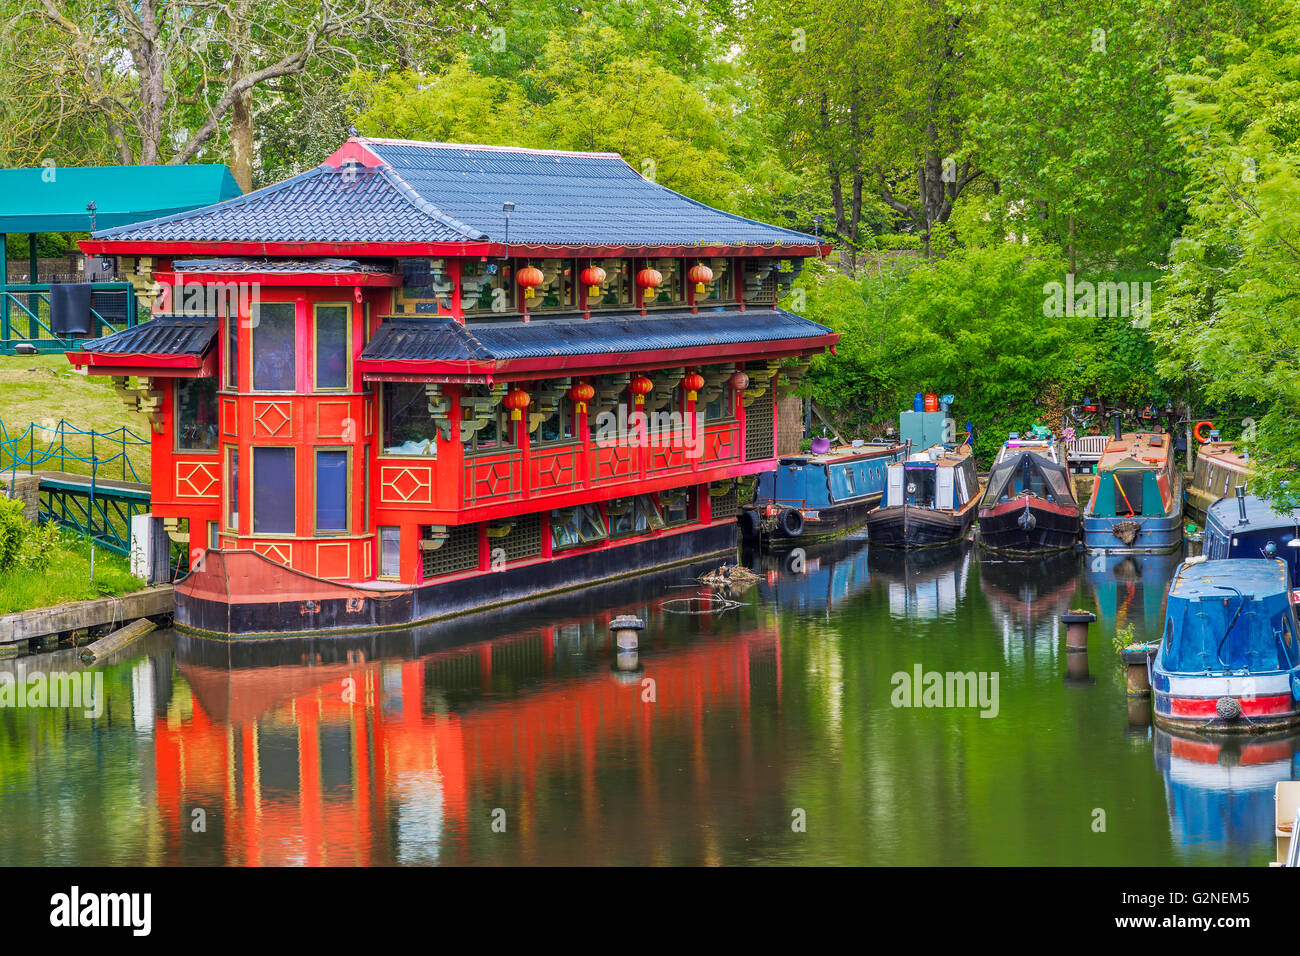 Floating Chinese restaurant on Regent’s canal, London Stock Photo